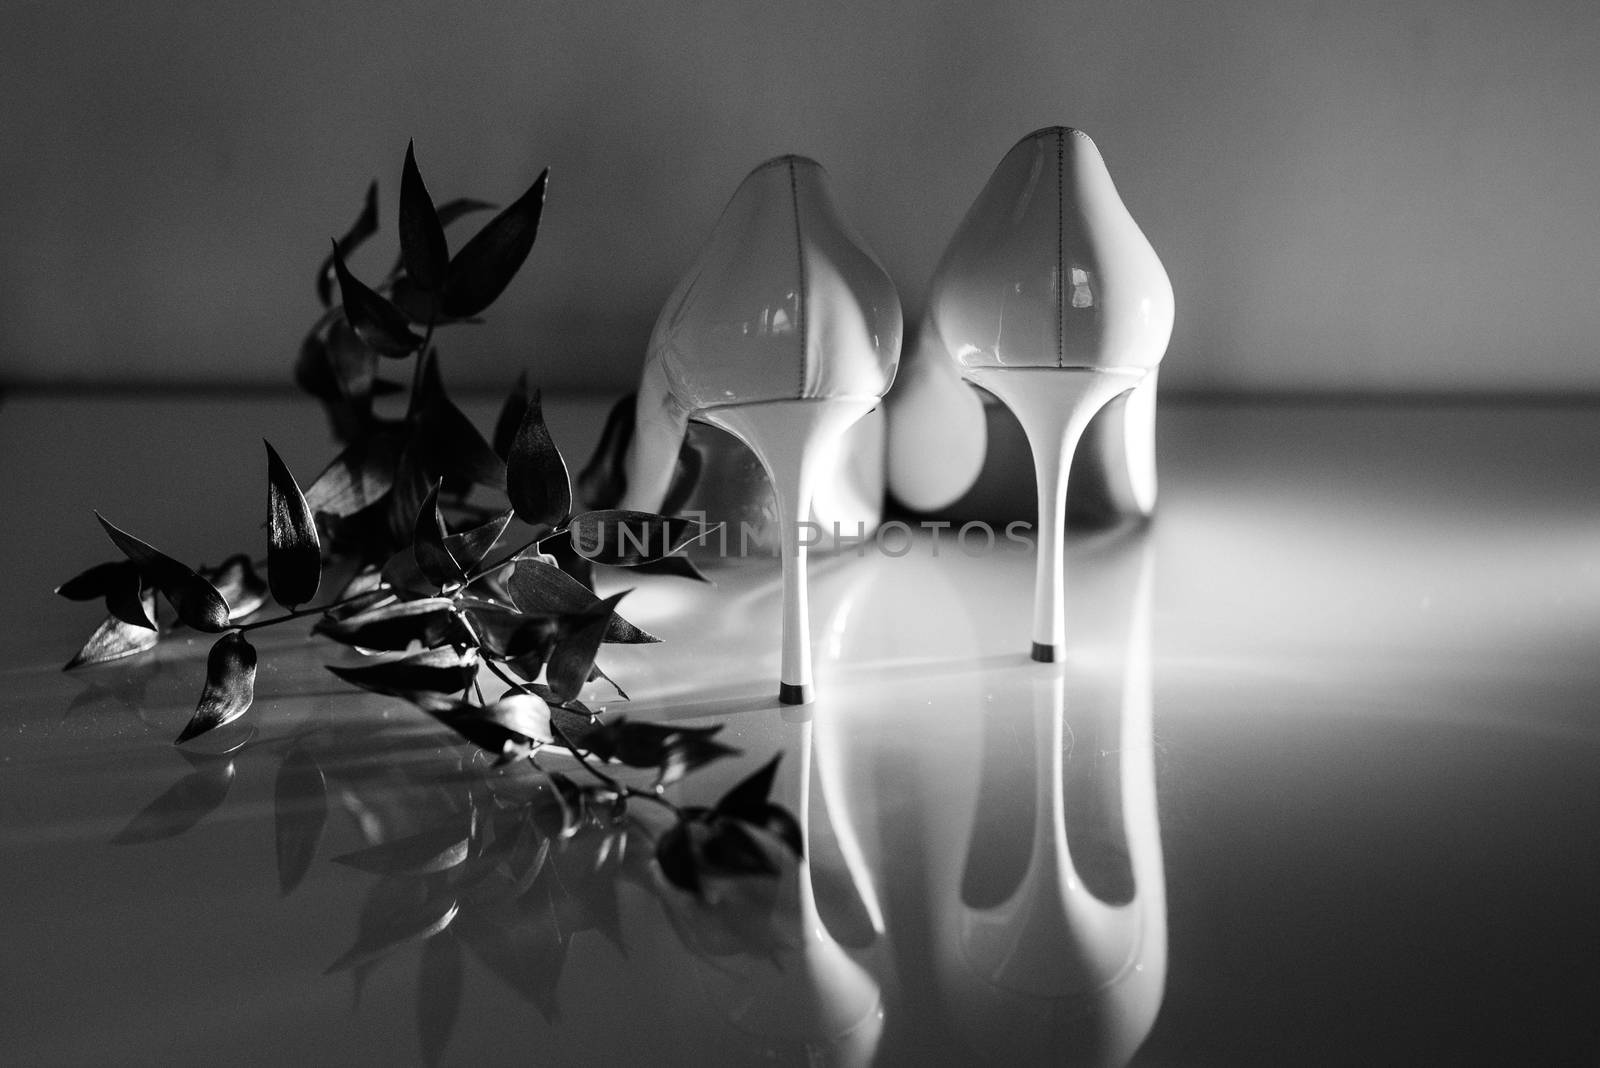 wedding shoes of the bride, beautiful fashion by Andreua